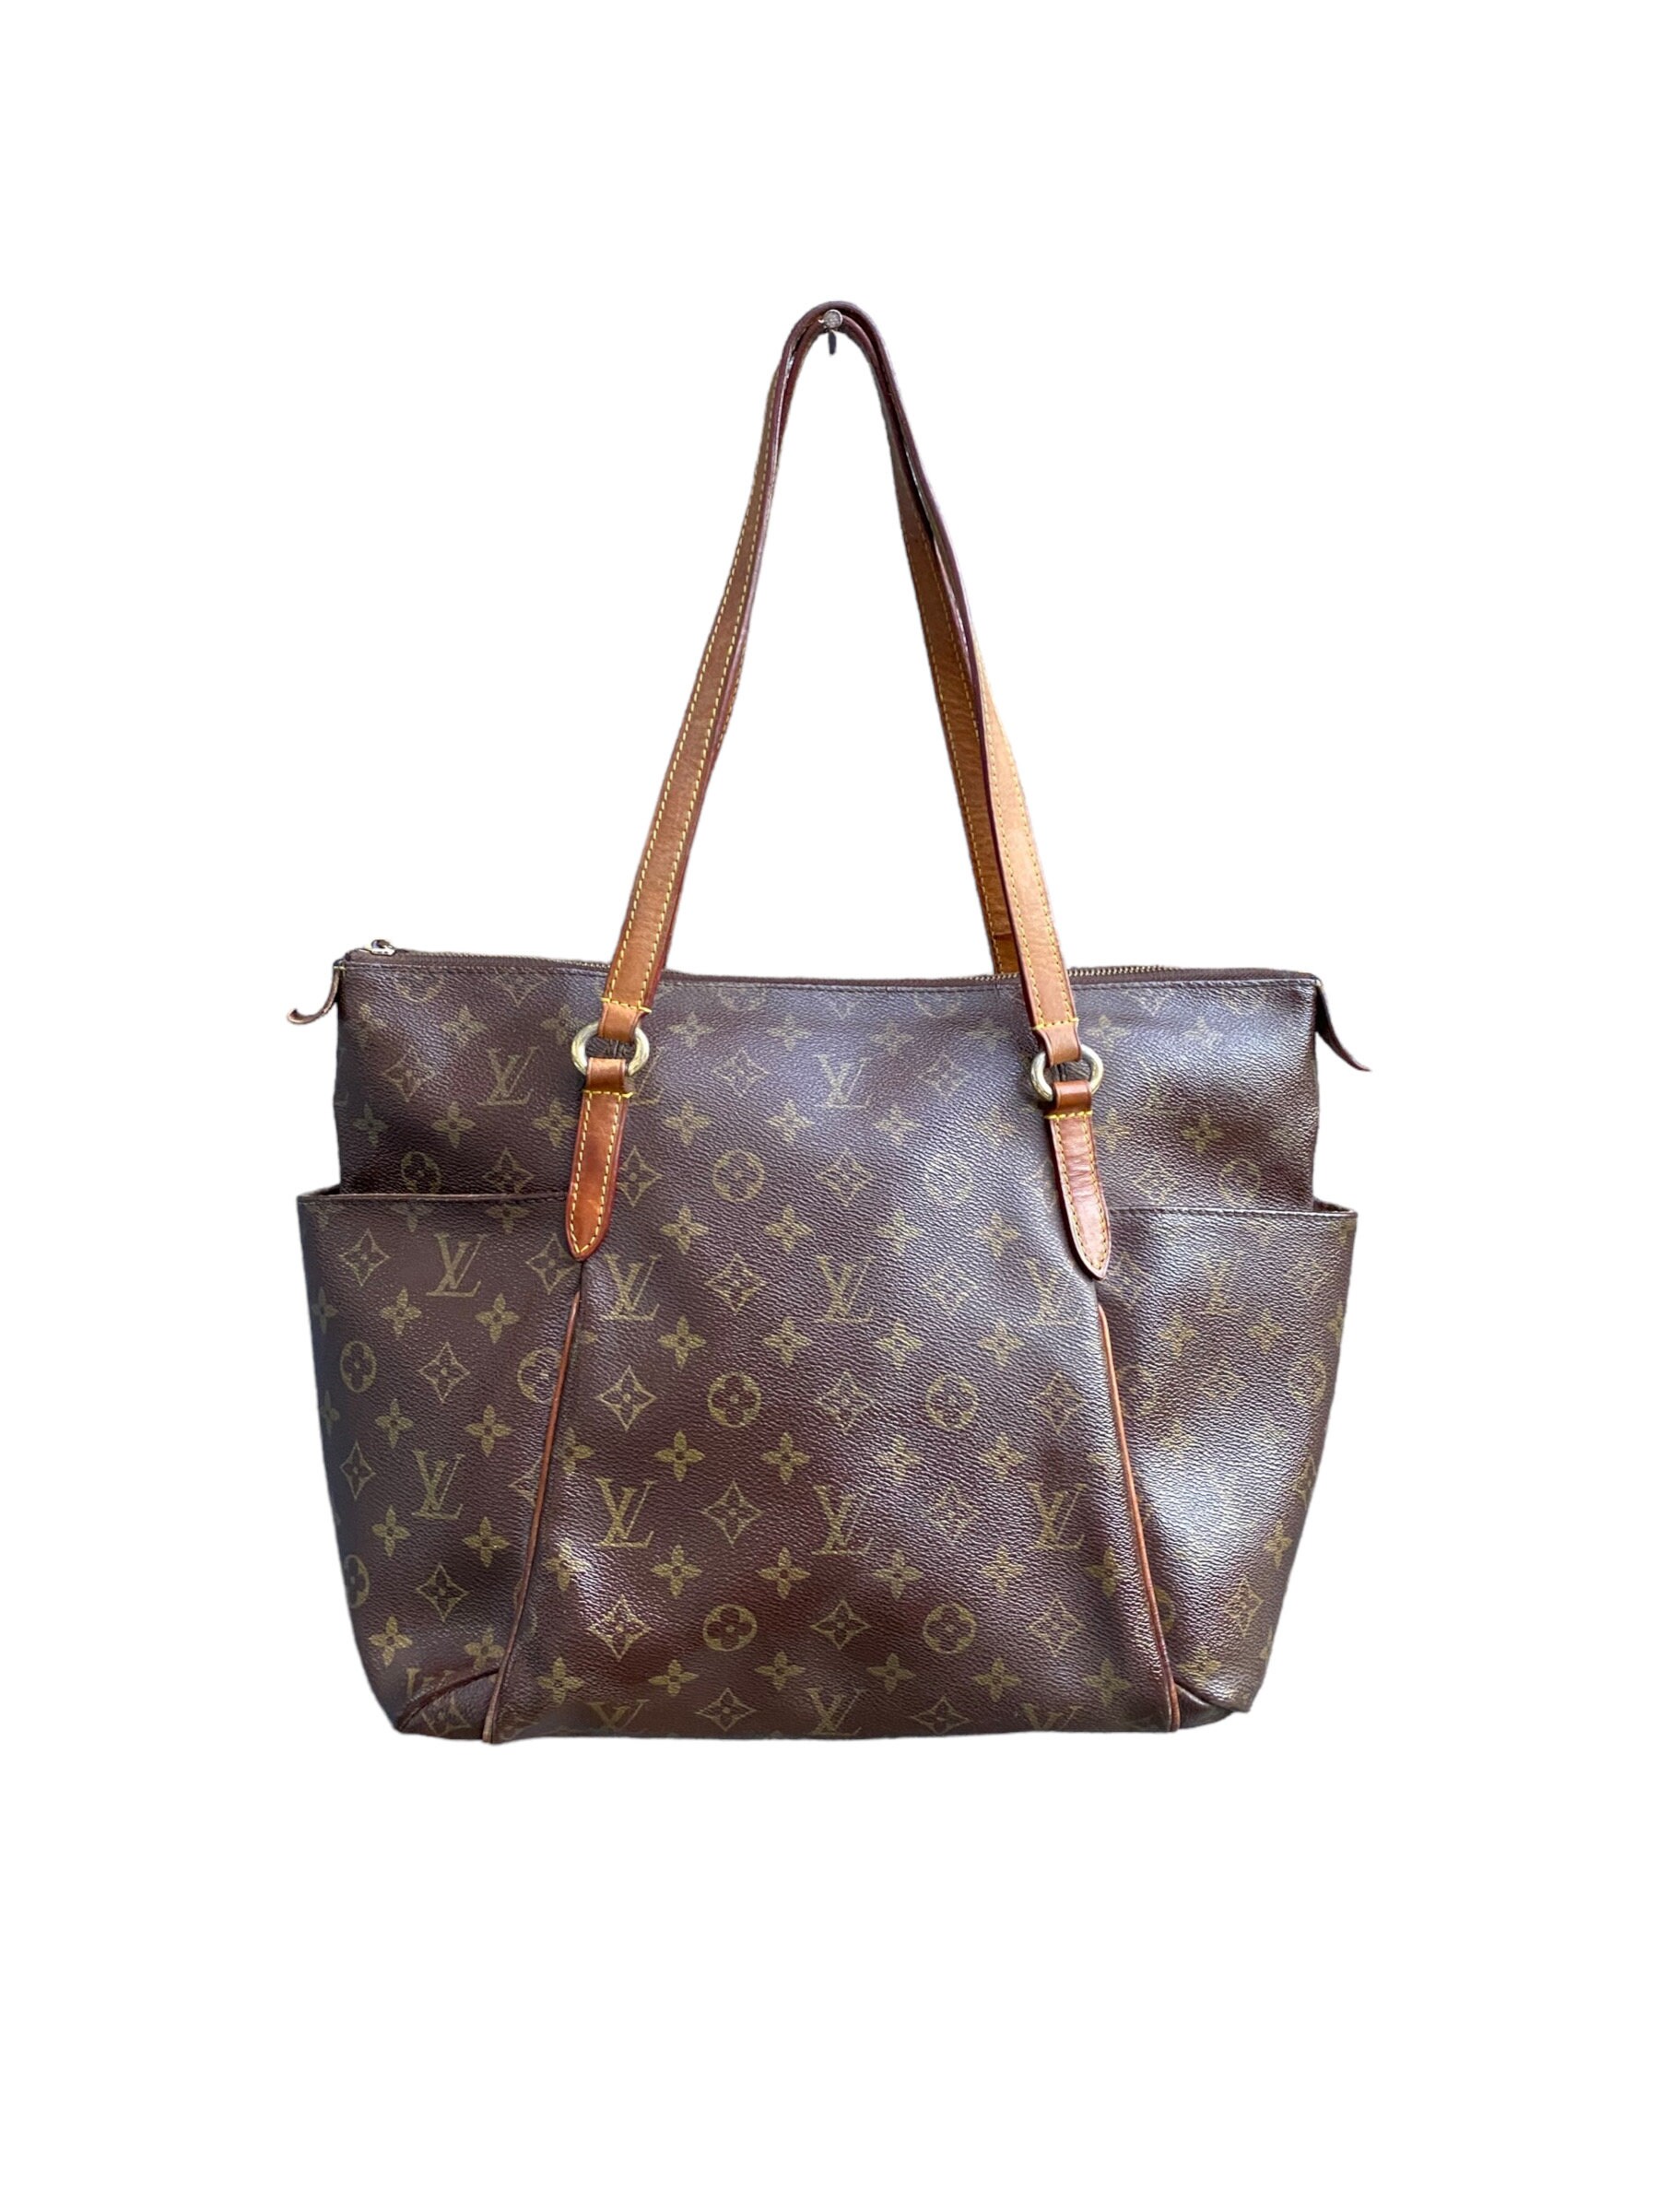 35 Personalized Neverfull MM ideas  louis vuitton, louis vuitton handbags, louis  vuitton bag